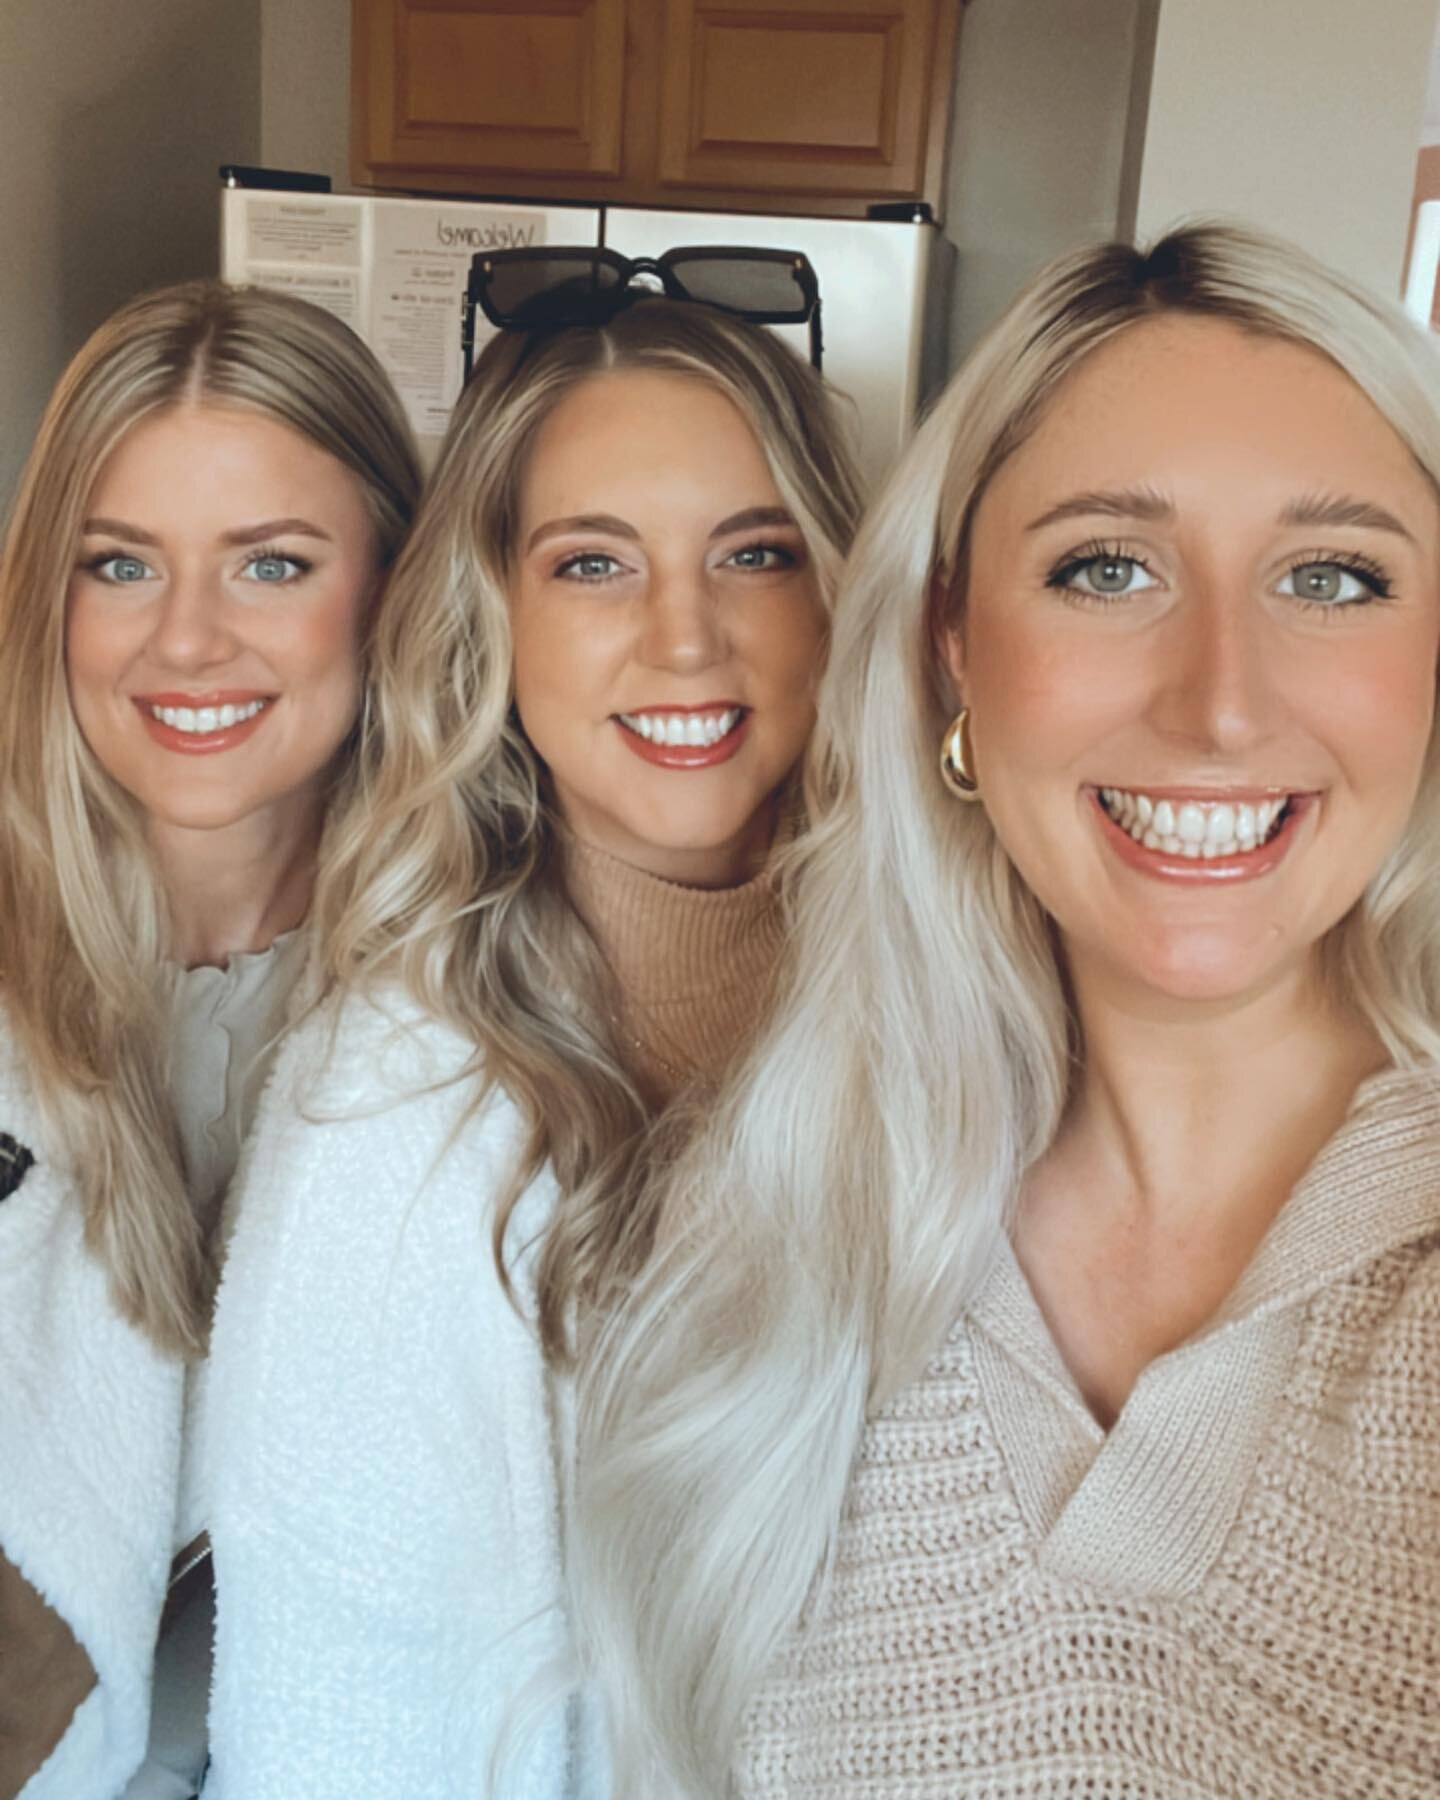 back with my girlies for a weekend in nashville and let me tell you something, Nashville is FUN even when you are sober the whole time 🩷
.
highly recommend!!